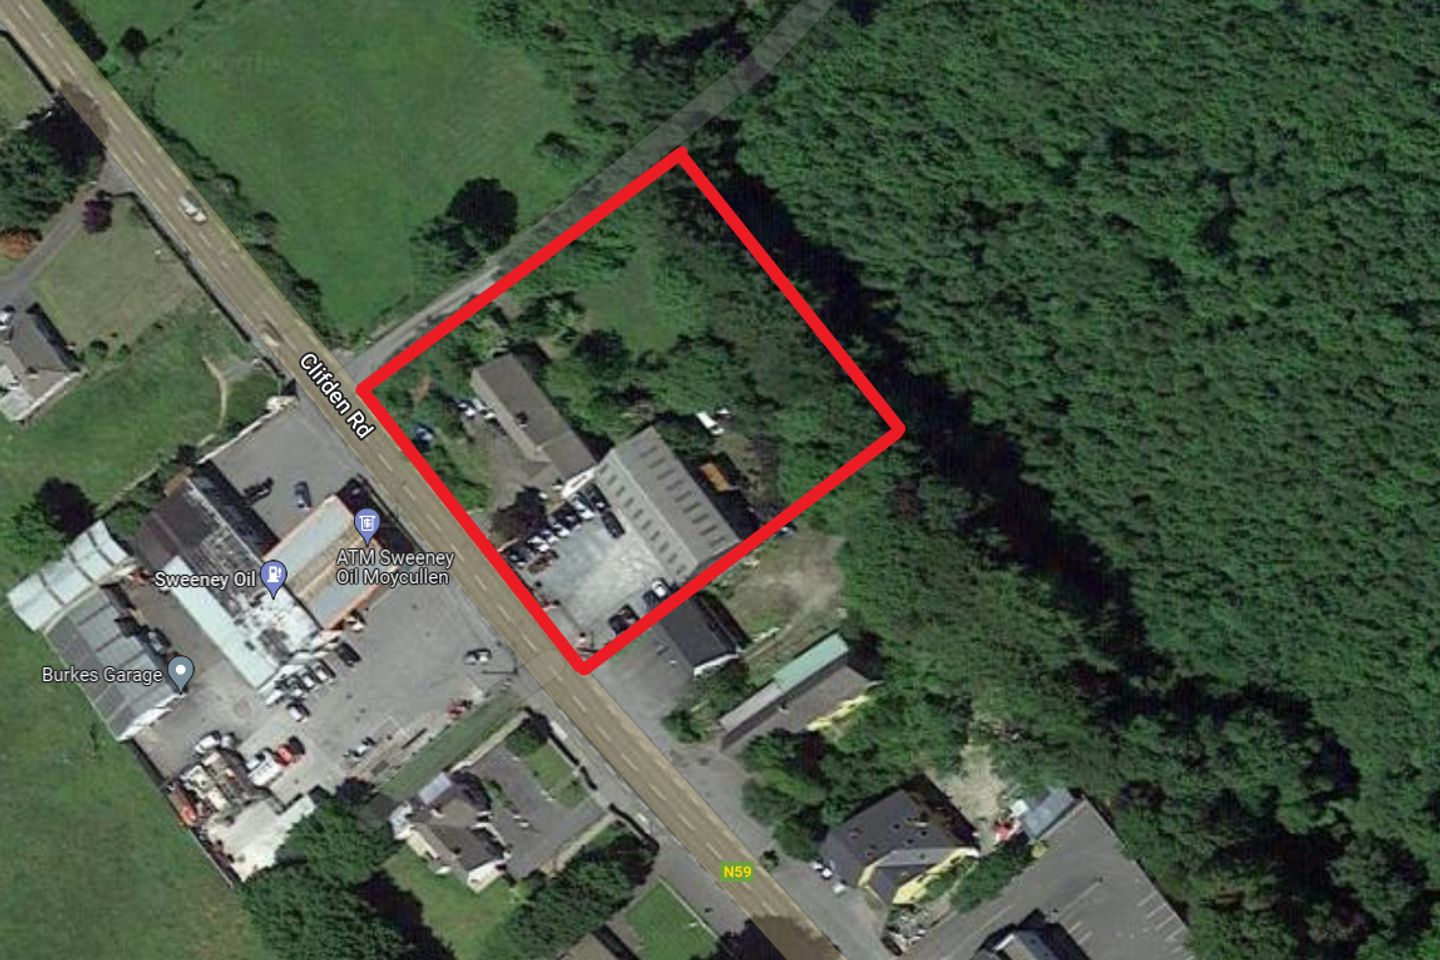 0.9 acre Development Site - Zoned C1 Town Centre - Killarainy, Clifden Road, Moycullen, Co. Galway, H91X3X2